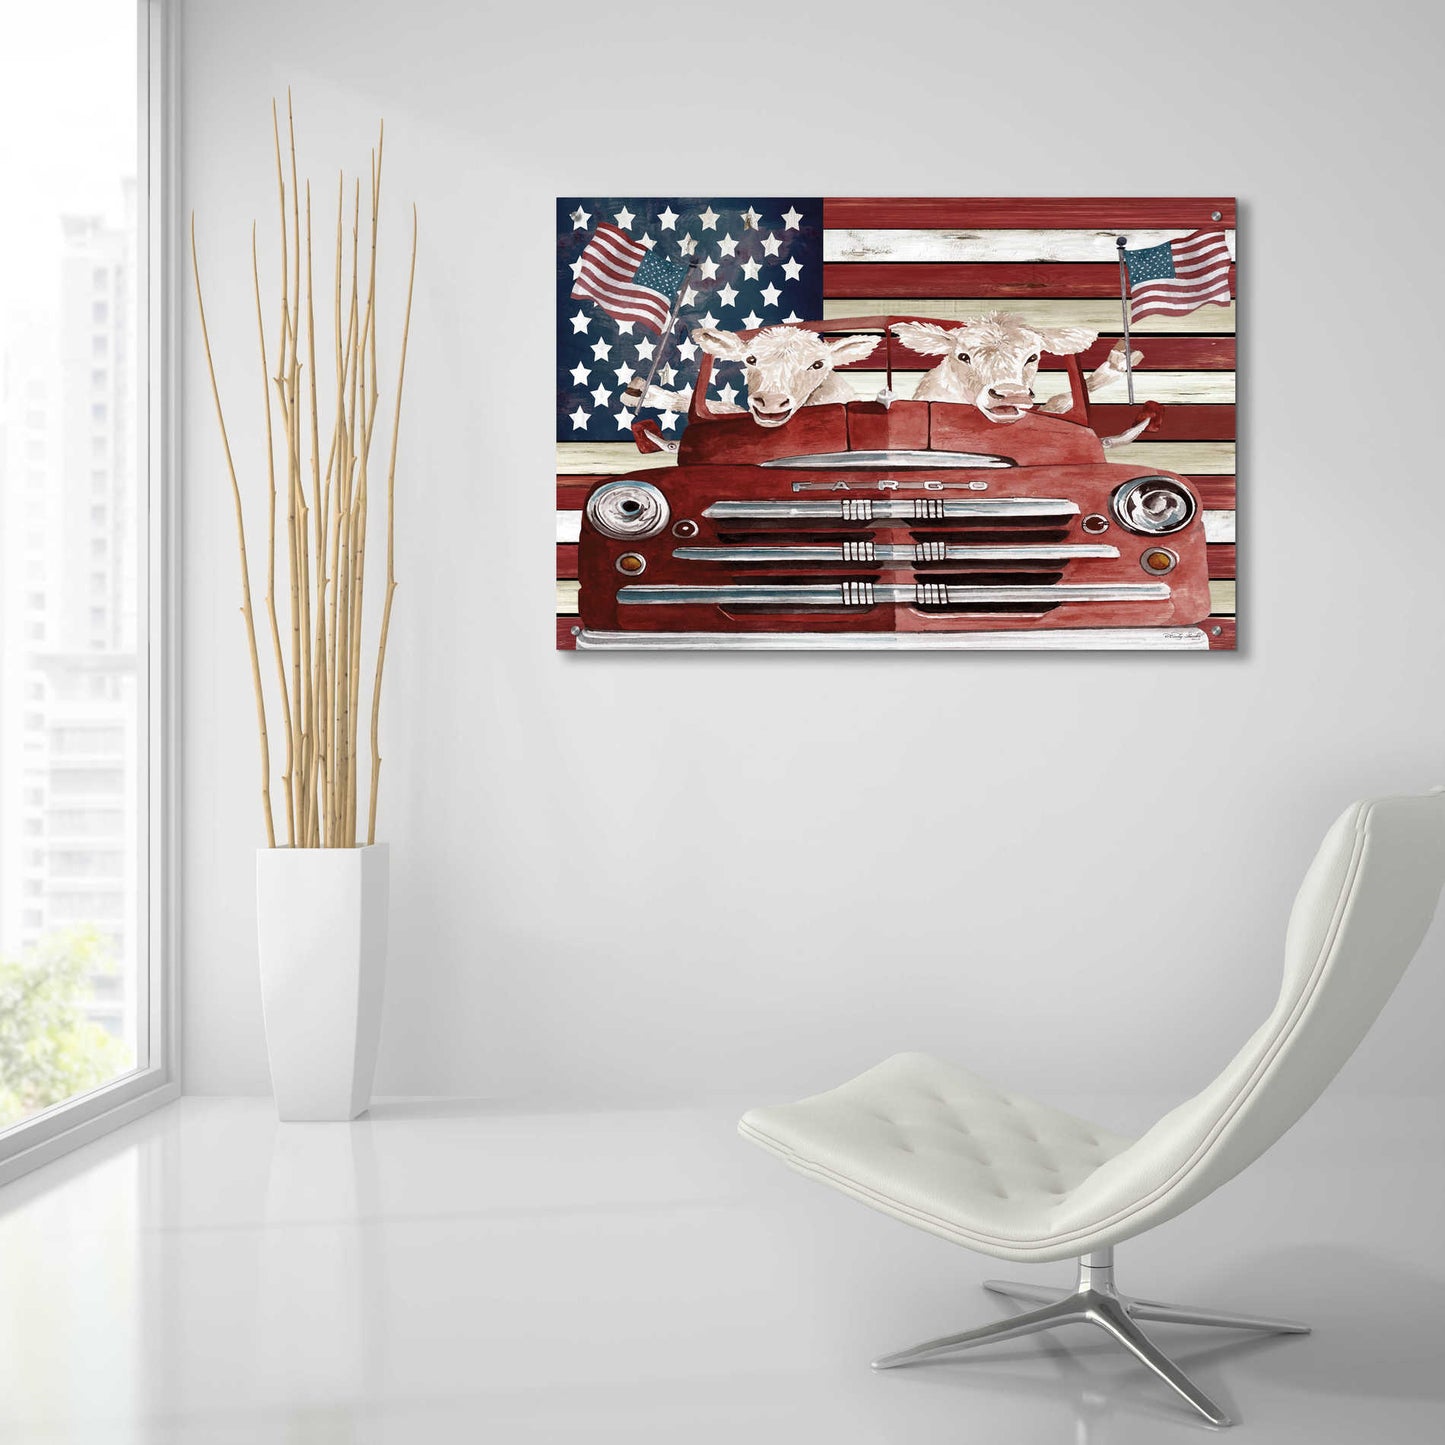 Epic Art 'Patriotic Cows' by Cindy Jacobs, Acrylic Glass Wall Art,36x24